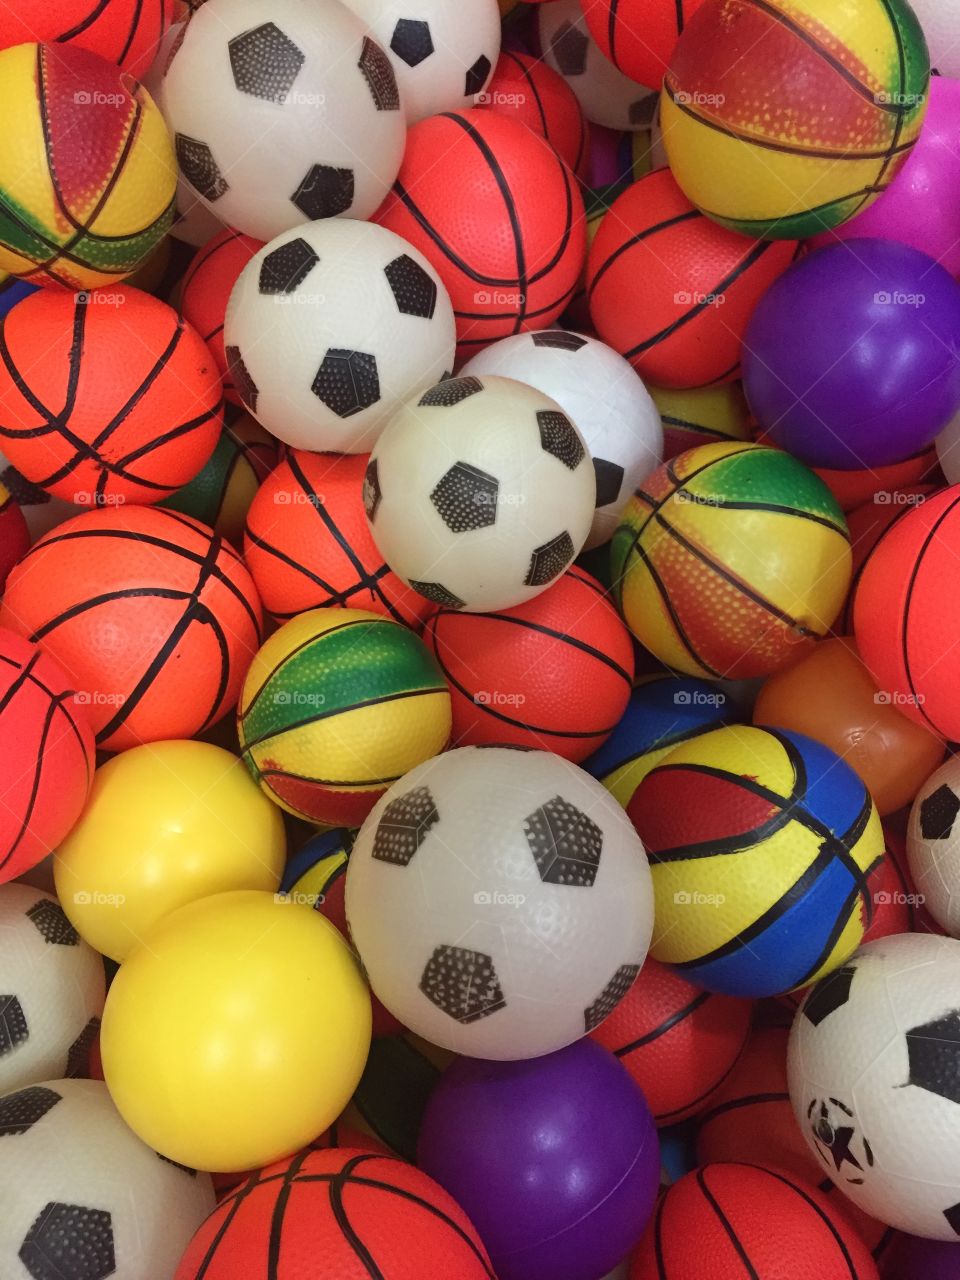 Colorful balls that helps relax minds. 